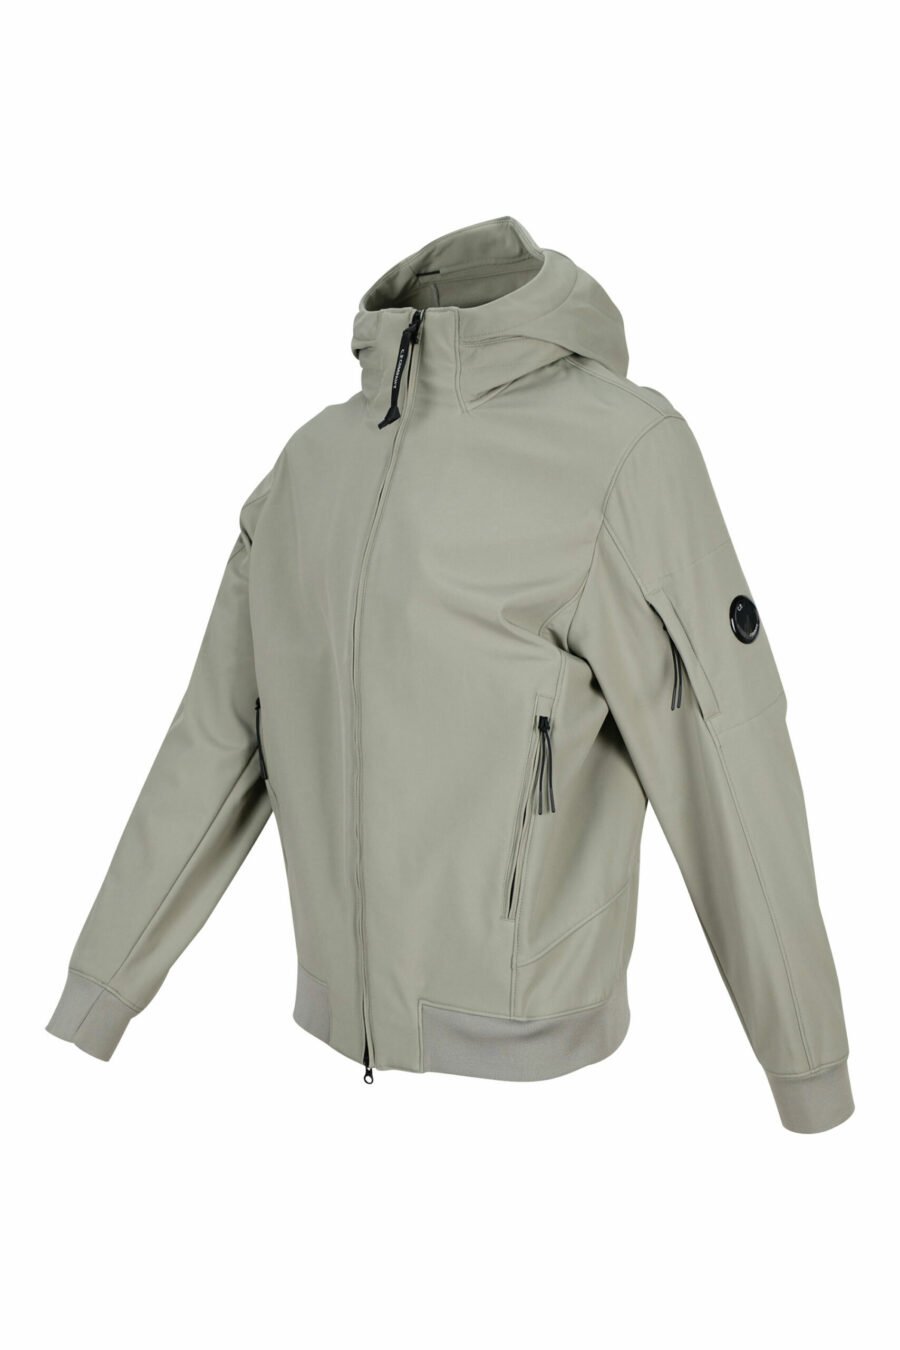 Beige jacket with hood and logo lens - 7620943543728 1 scaled